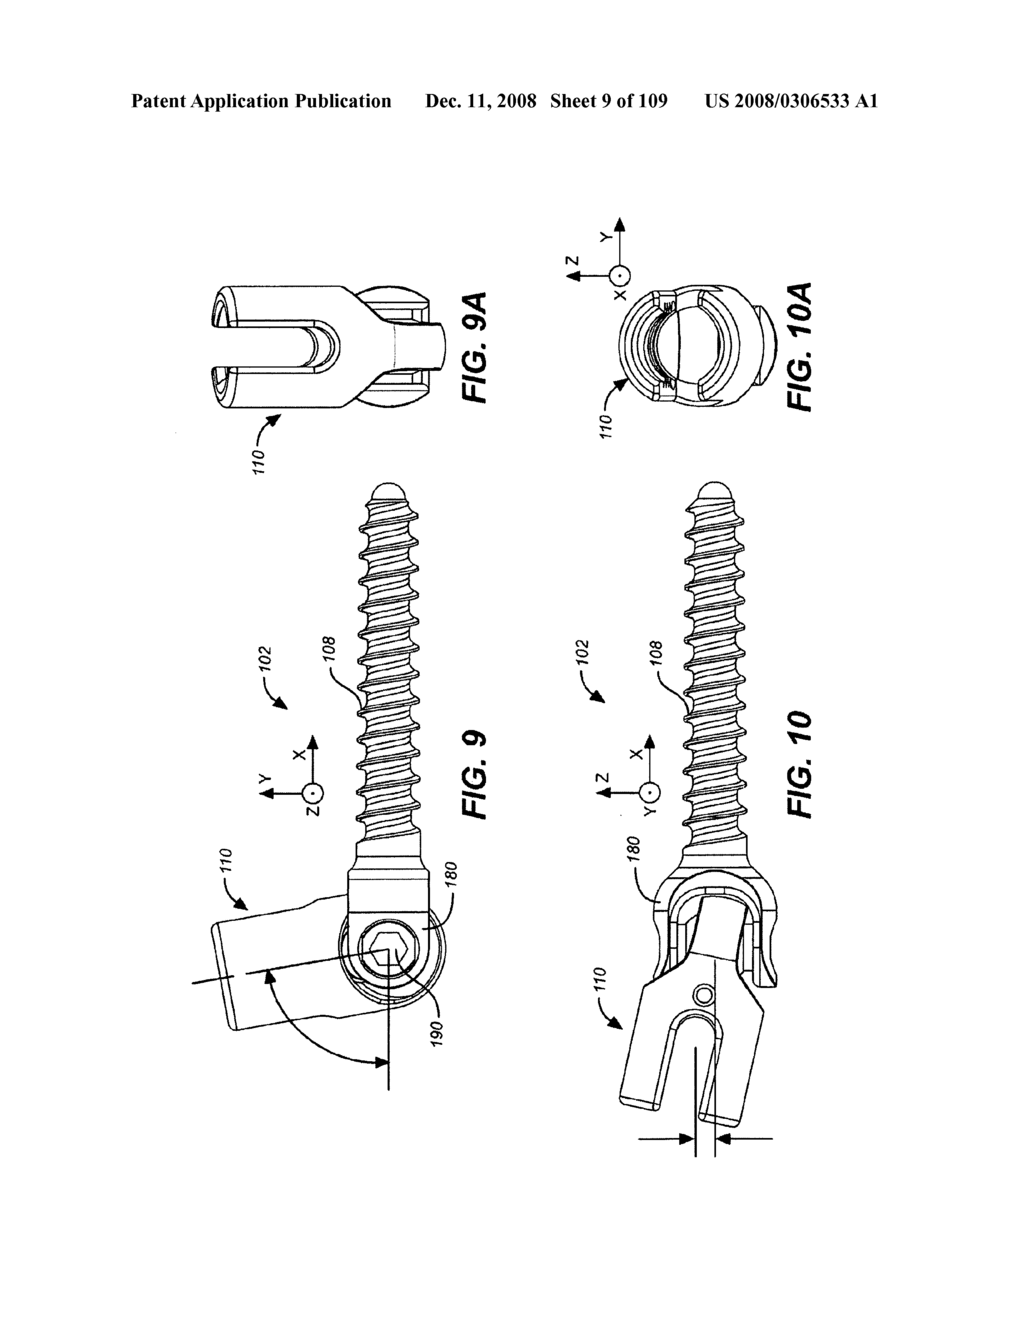 DEFLECTION ROD SYSTEM FOR USE WITH A VERTEBRAL FUSION IMPLANT FOR DYNAMIC STABILIZATION AND MOTION PRESERVATION SPINAL IMPLANTATION SYSTEM AND METHOD - diagram, schematic, and image 10